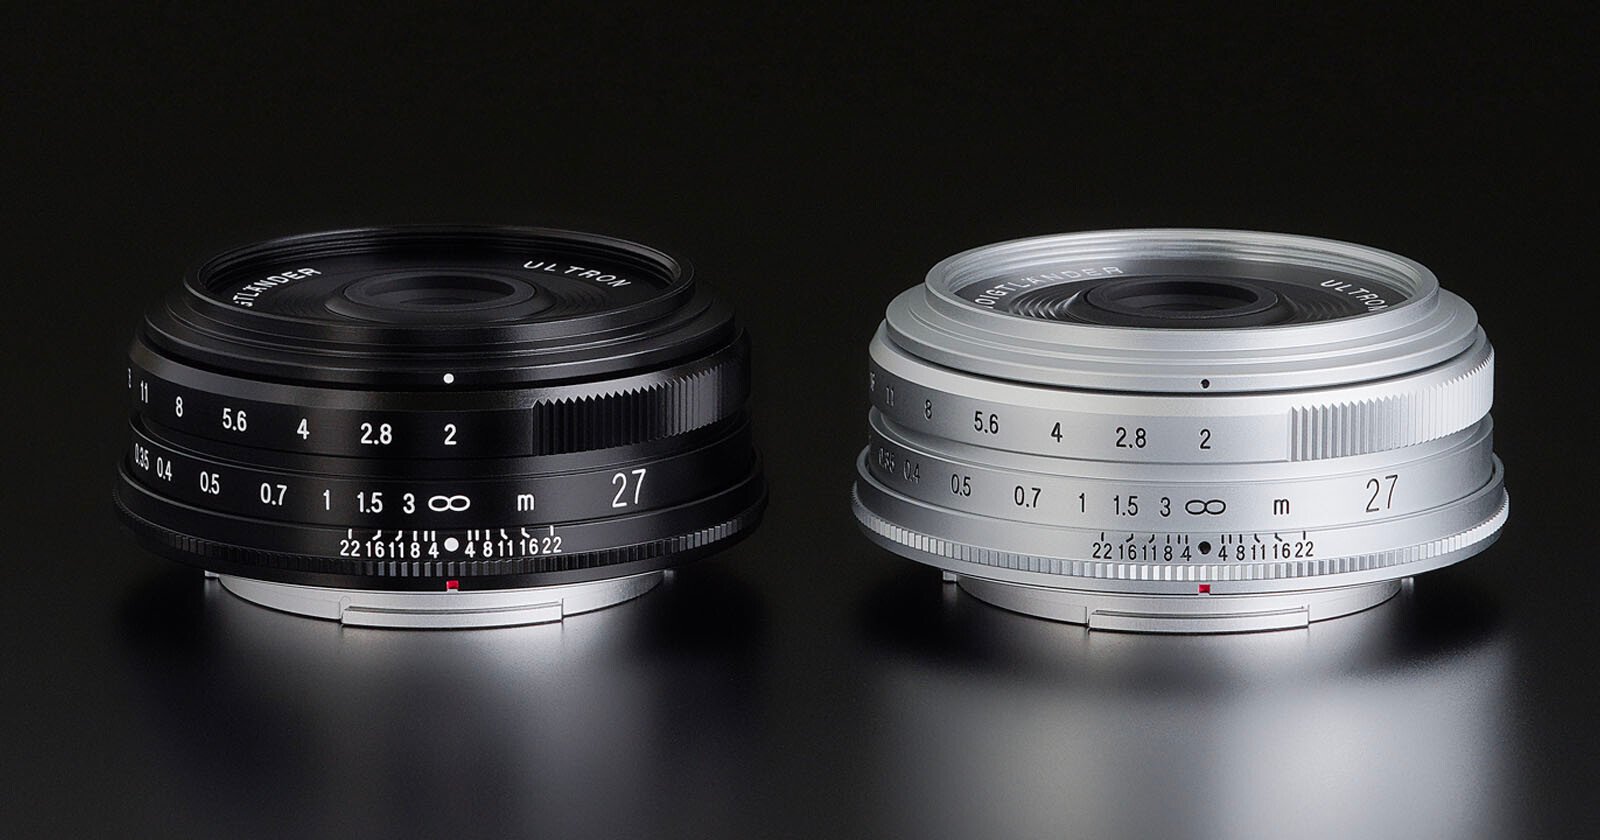 Cosina’s New Voigtlander Ultron 27mm f/2 is Made Exclusively for Fujifilm X